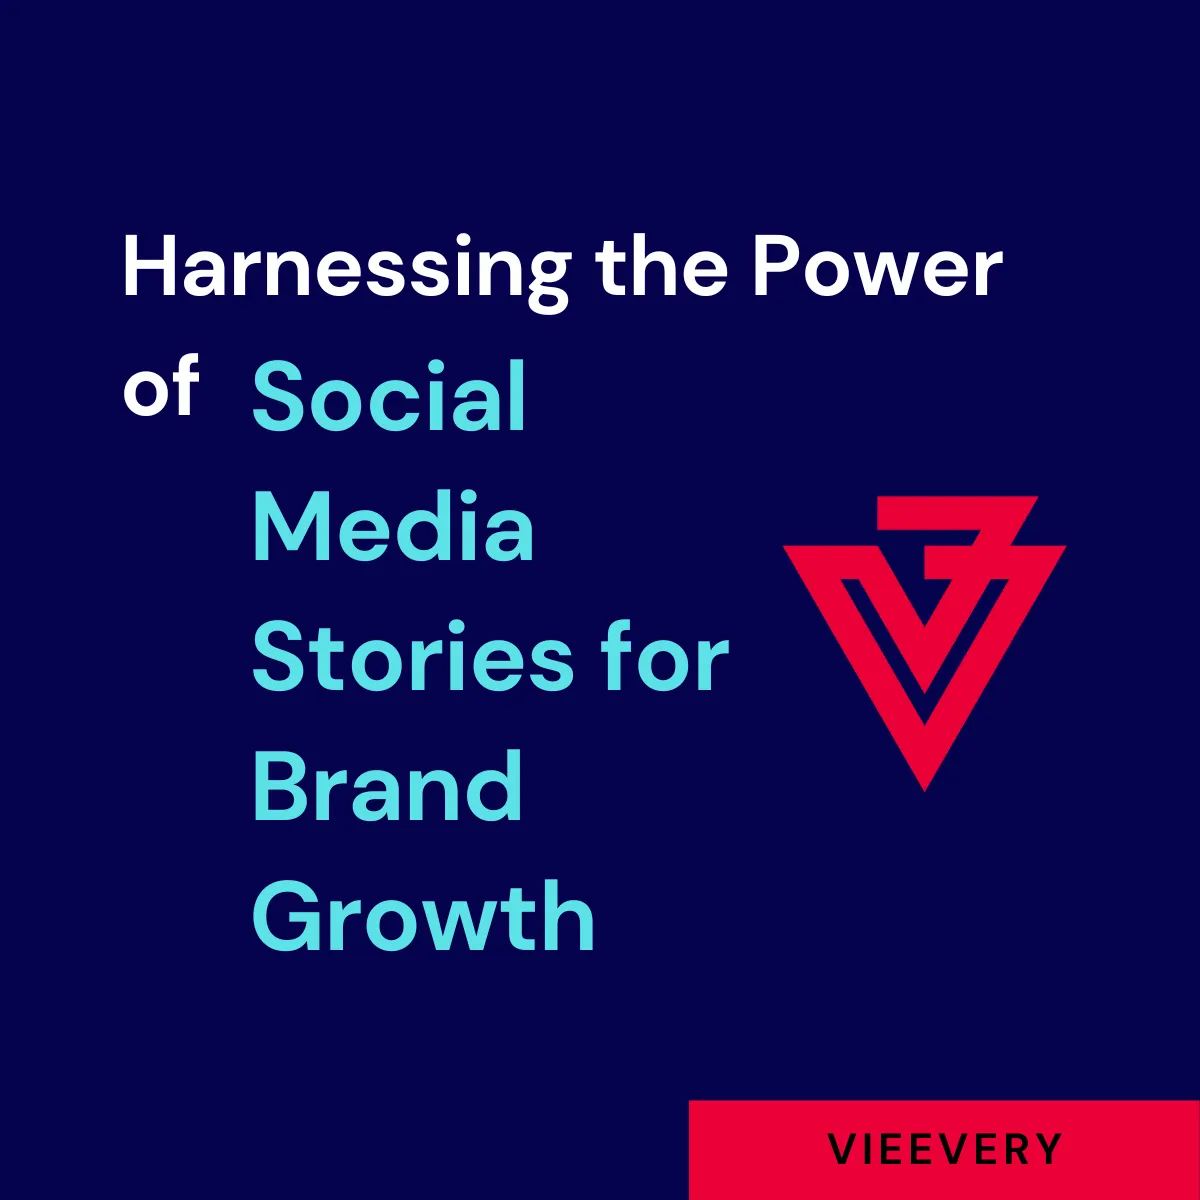 Harnessing the Power of Social Media Stories for Brand Growth